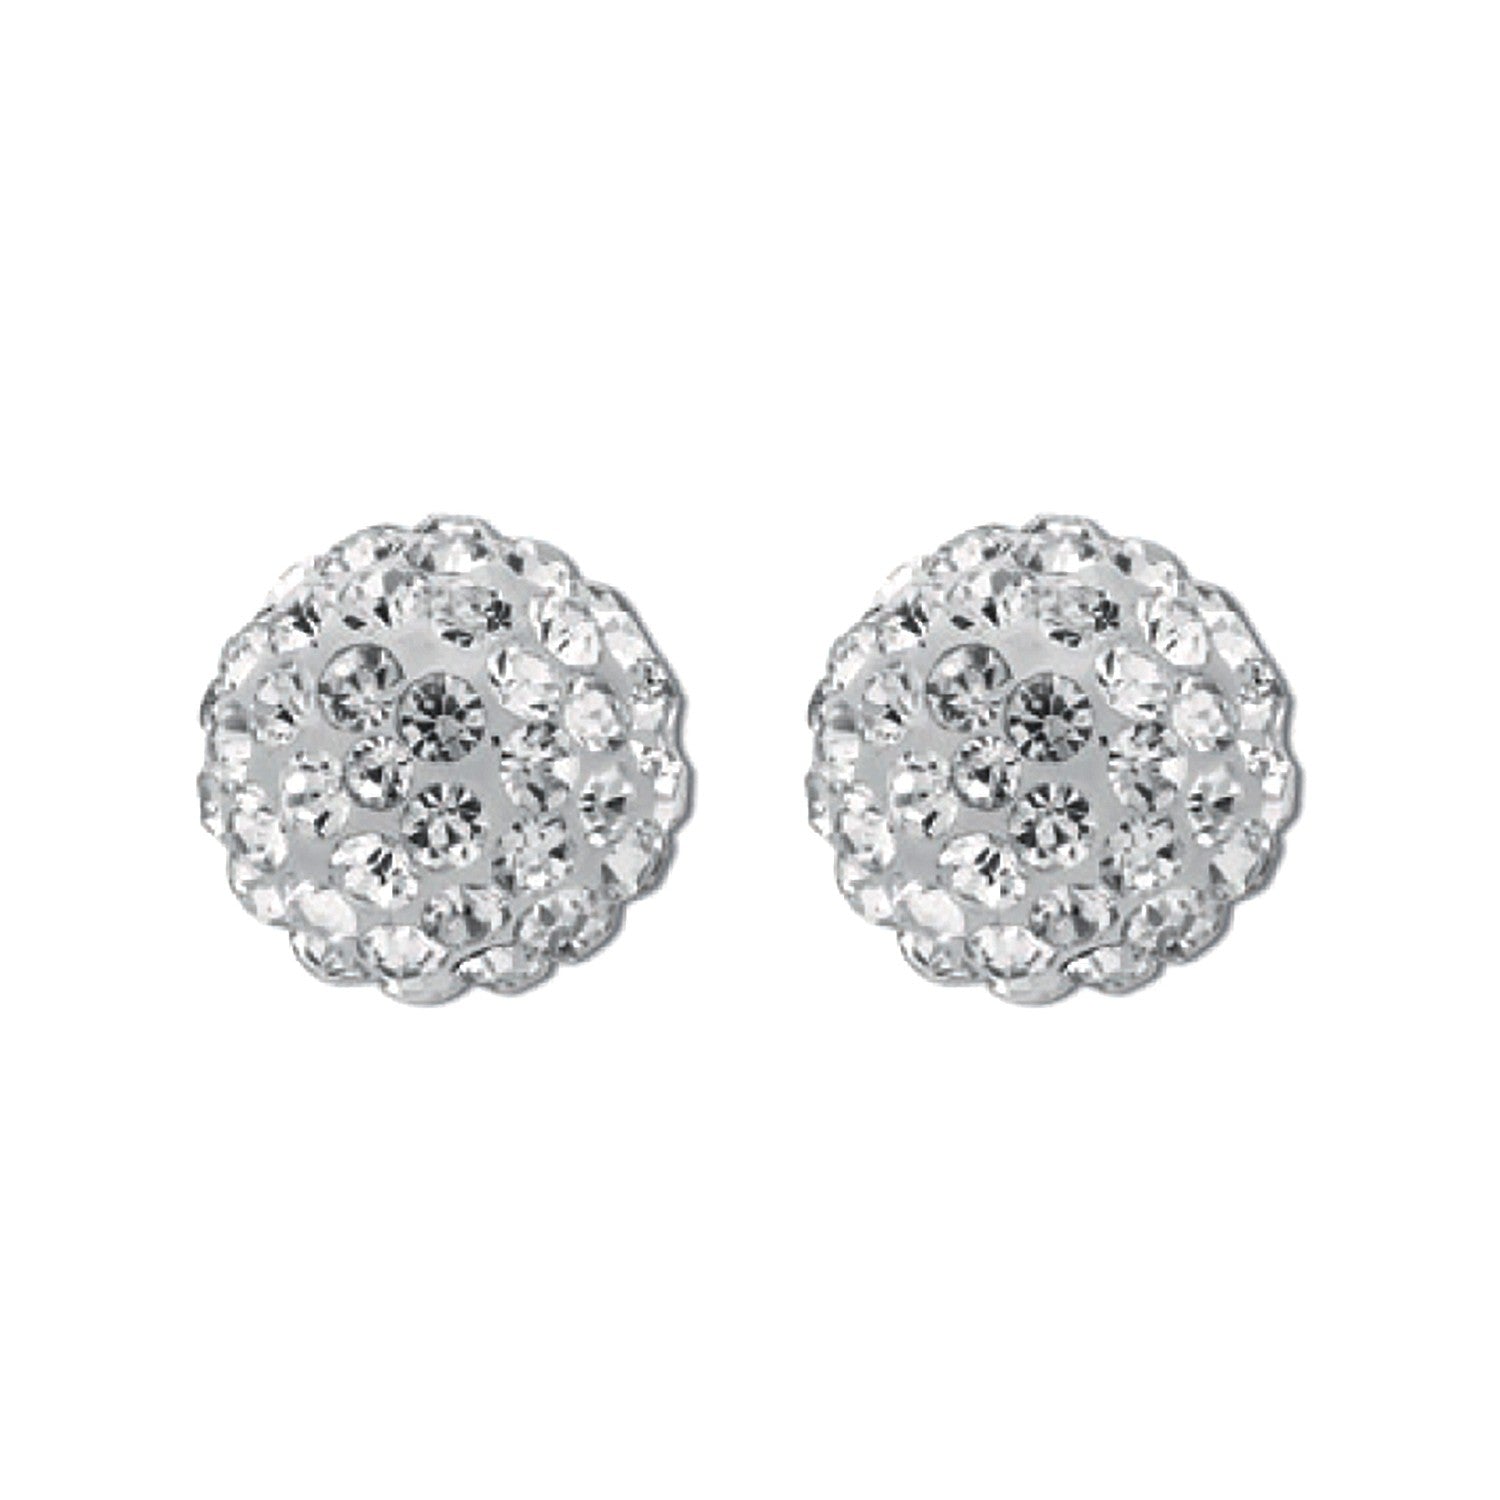 Yellow Gold 10 mm White  Crystal Stud Earrings